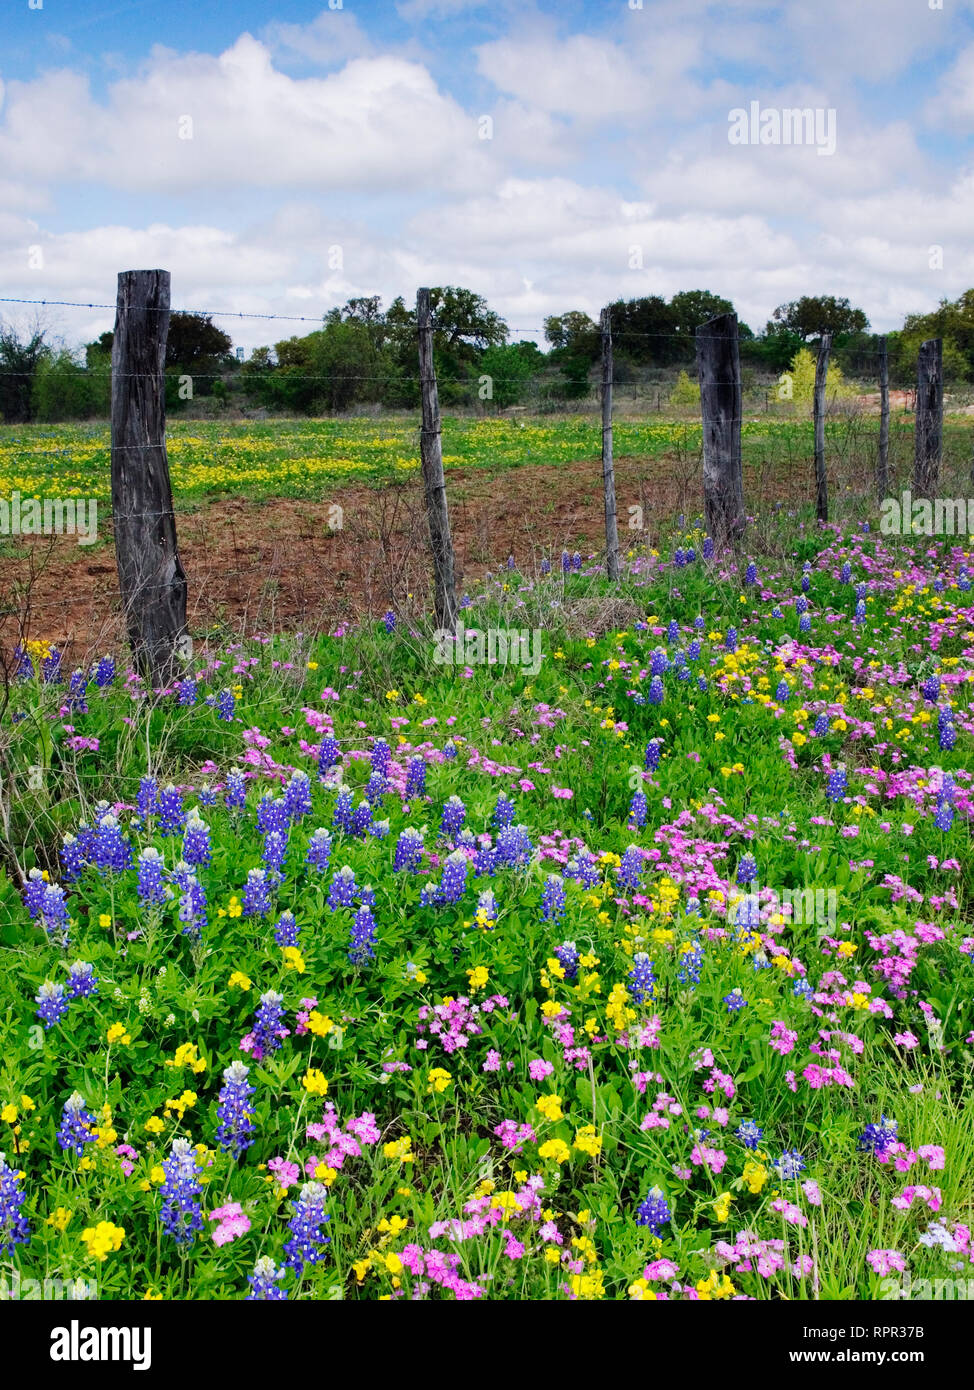 Barbed Wire Fence With Wildflowers in Foreground Stock Photo